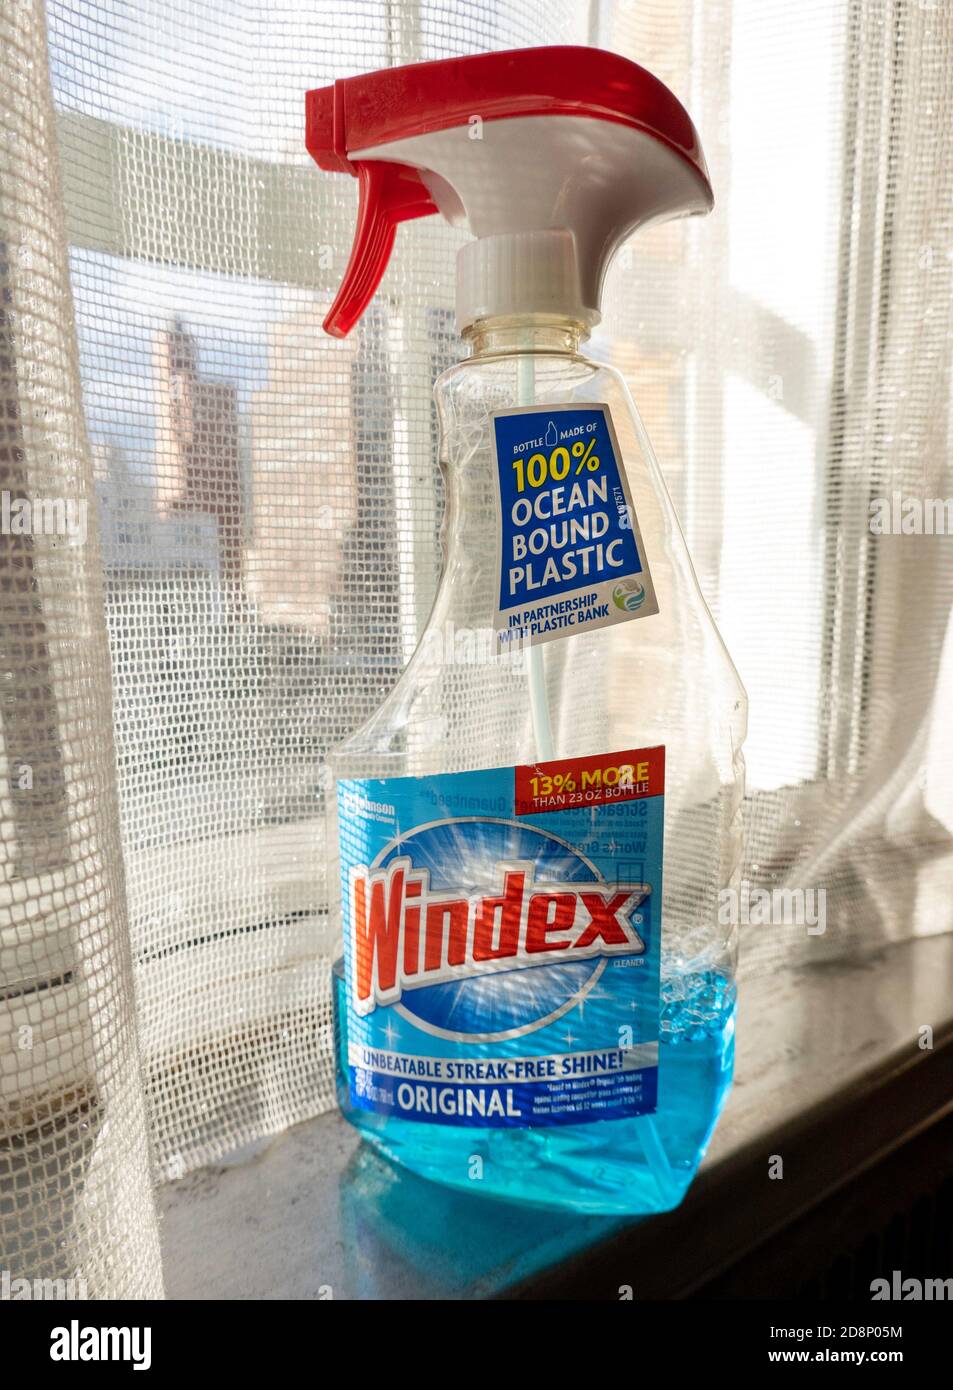 SC Johnson now features 100% ocean-bound plastic trigger bottles for Windex glass cleaner, United States Stock Photo